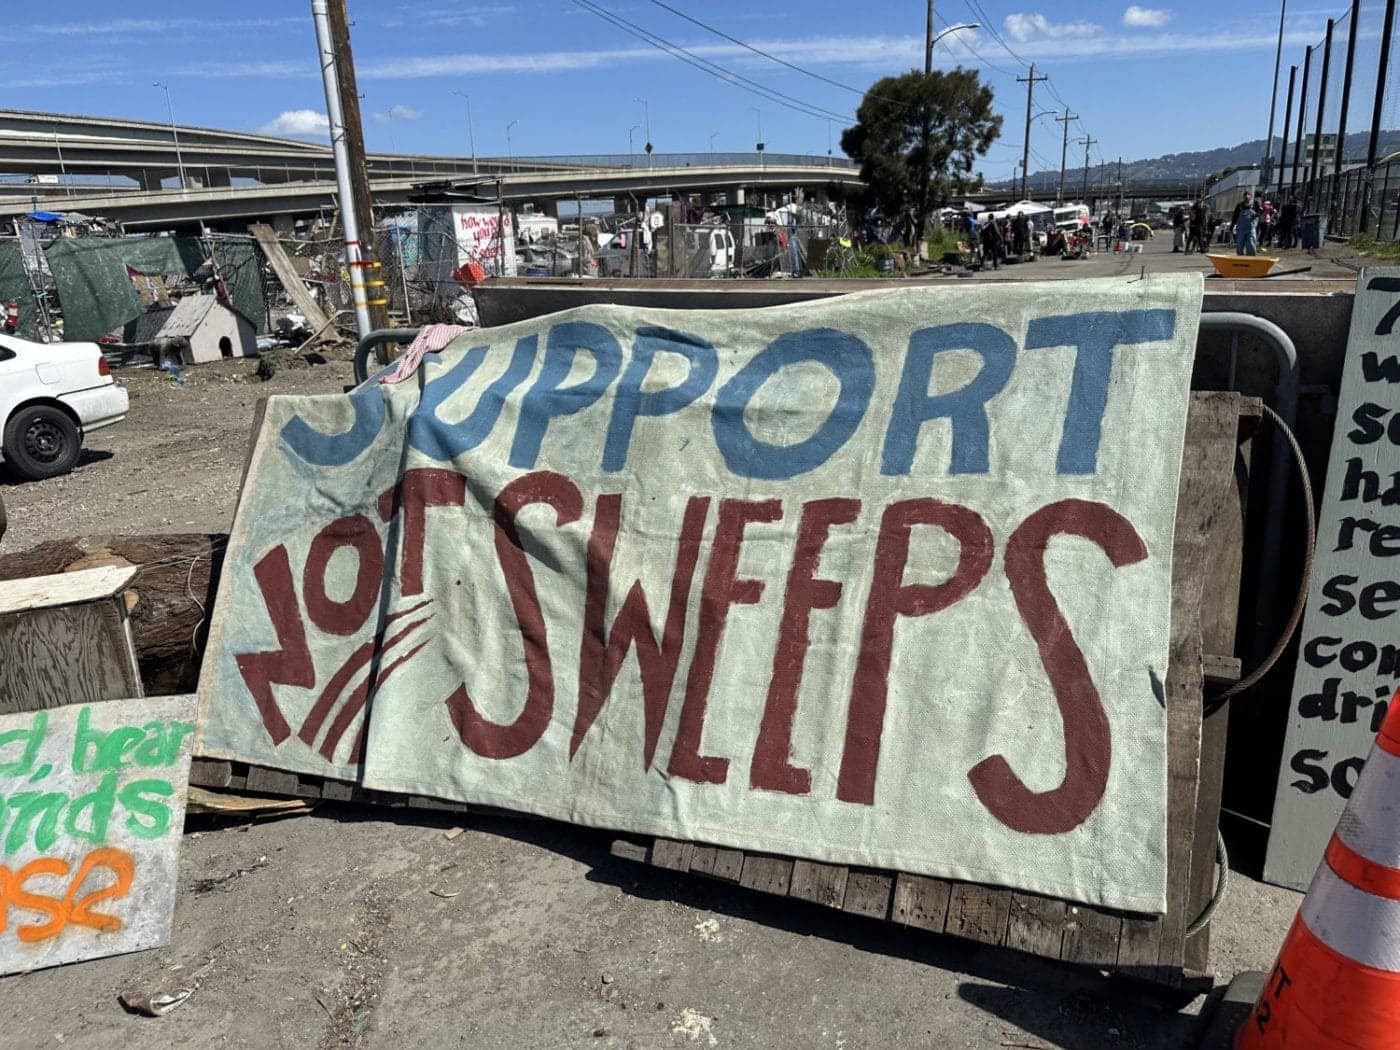 Support-not-sweeps-1400x1050, Destroying a homeless peoples' solution to homelessness-, Featured News & Views 